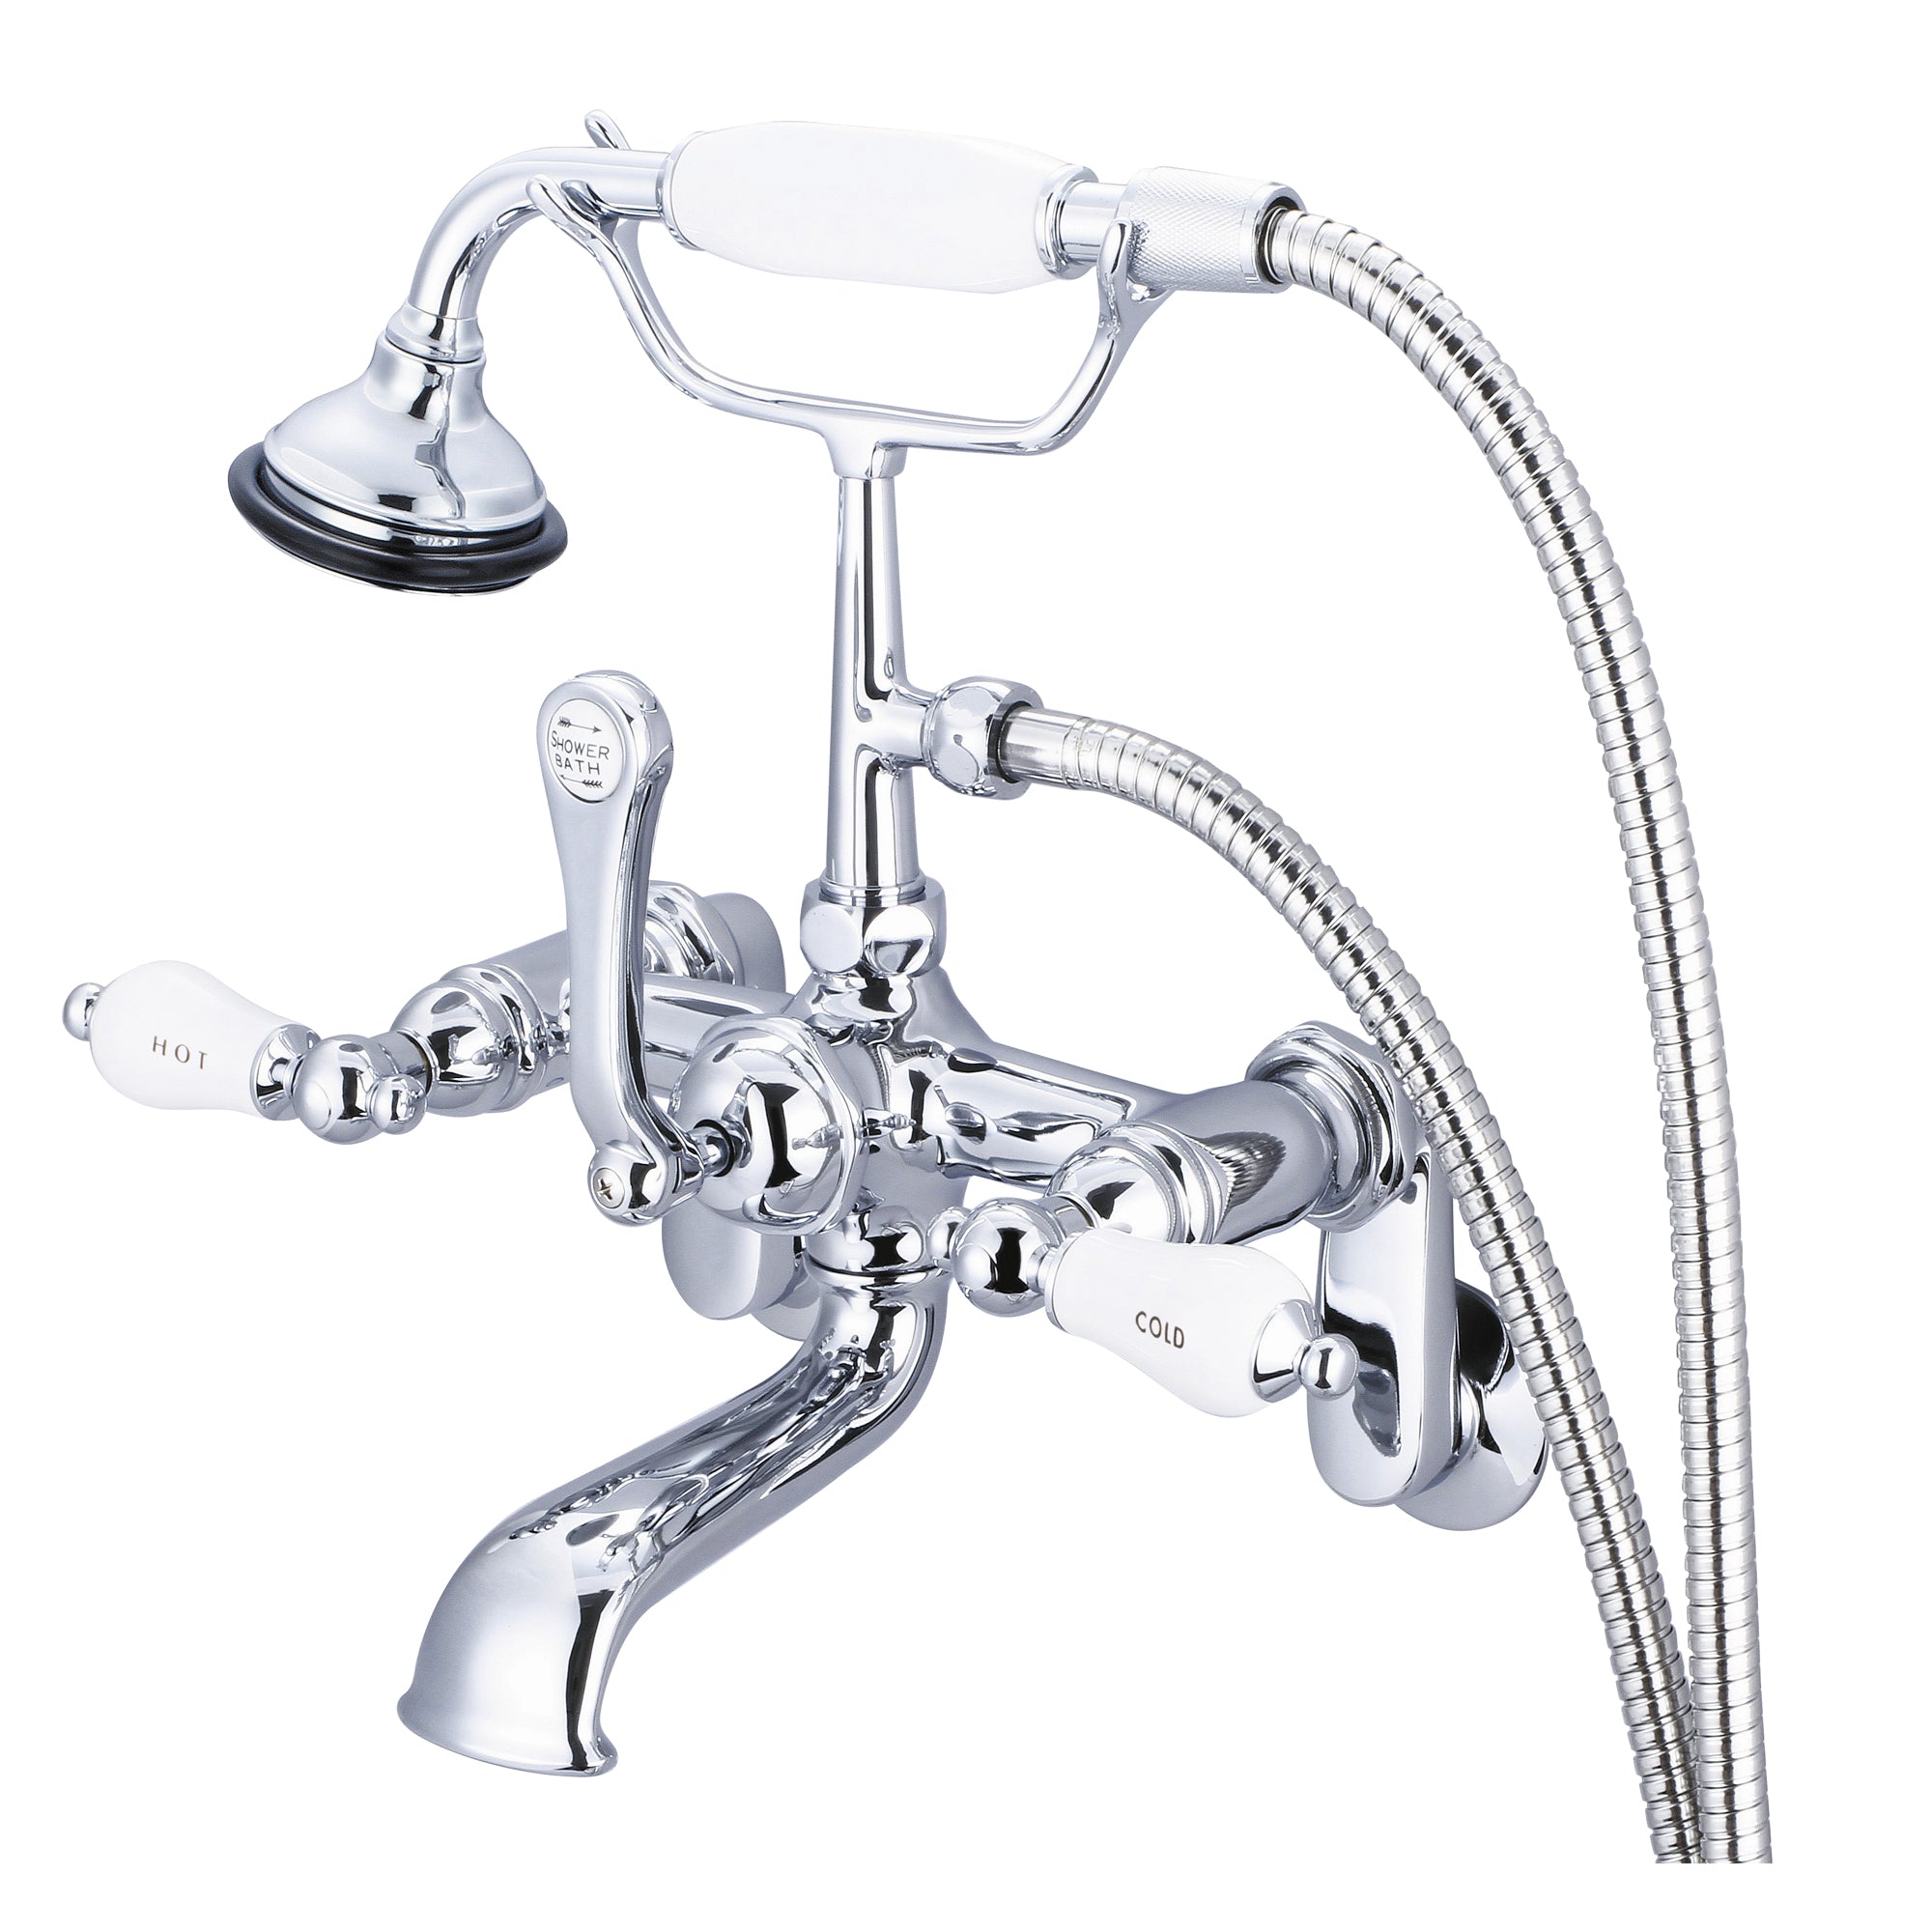 Water Creation | Vintage Classic Adjustable Center Wall Mount Tub Faucet With Swivel Wall Connector & Handheld Shower in Chrome Finish With Porcelain Lever Handles, Hot And Cold Labels Included | F6-0009-01-CL